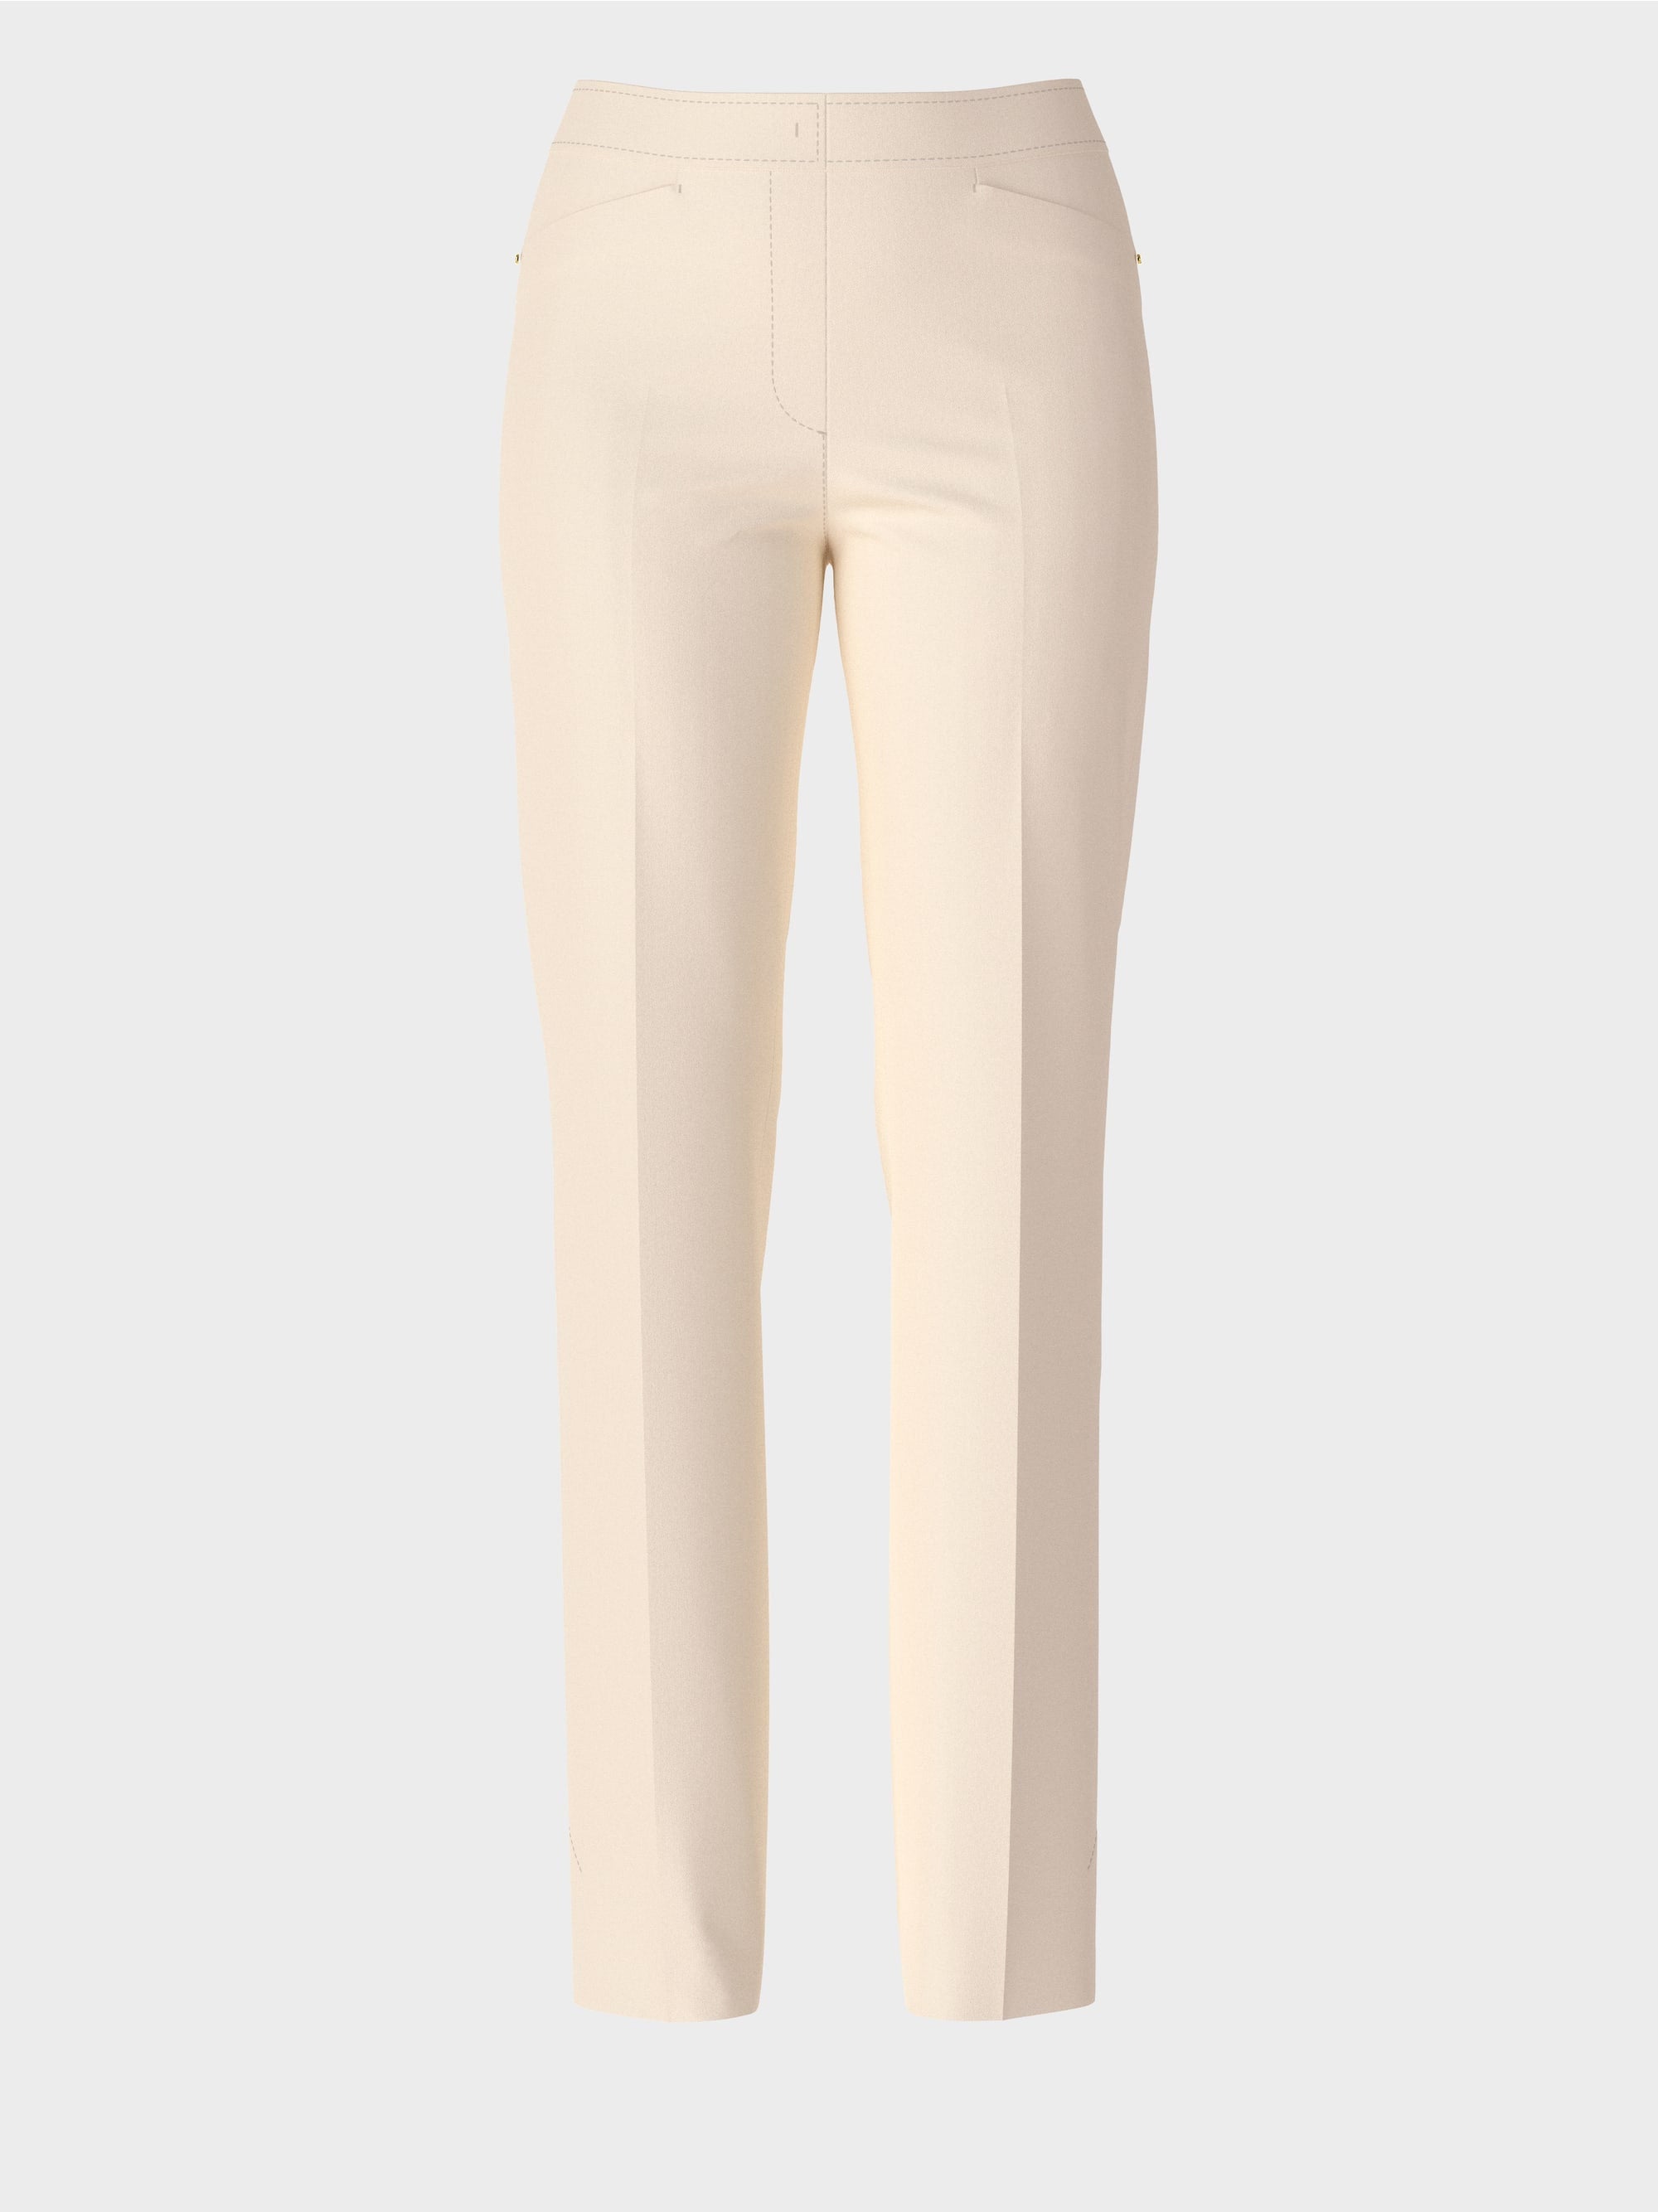 Fendou Stretch Pants With Crease_VC 81.42 W09_116_06